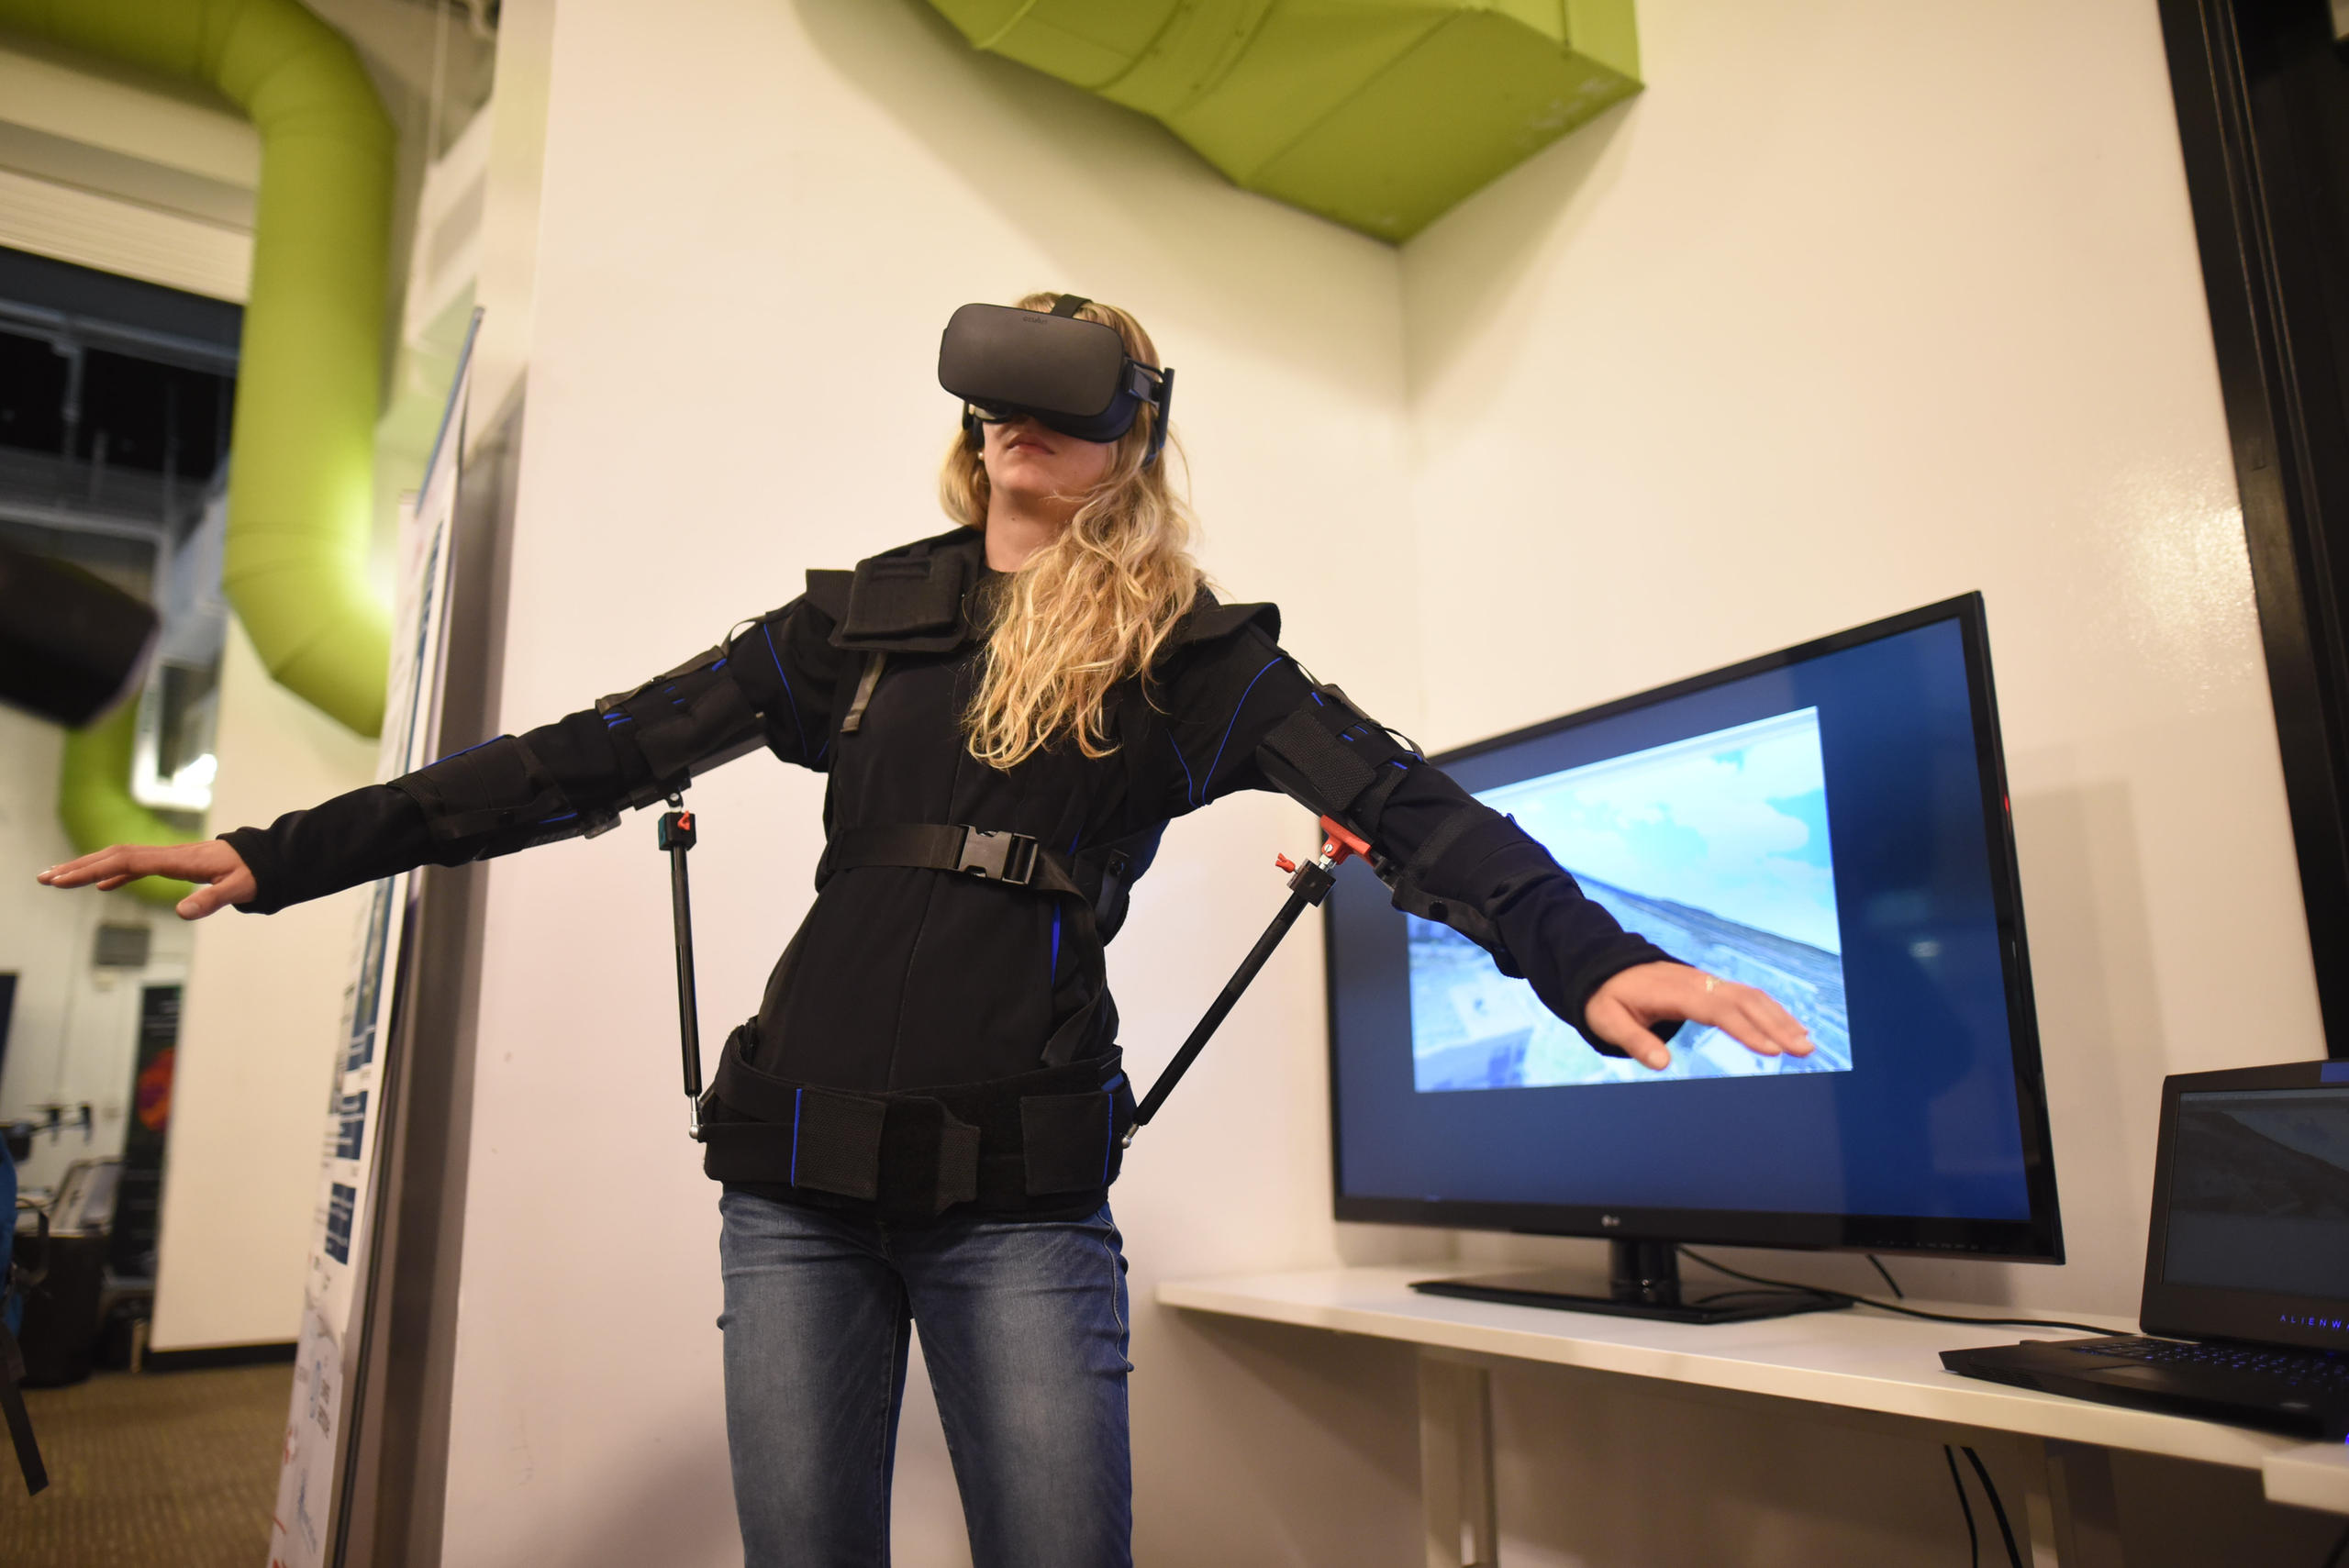 A woman demonstrates EPFL s FlyJacket, which allows users to pilot drones within an immersive VR environment.